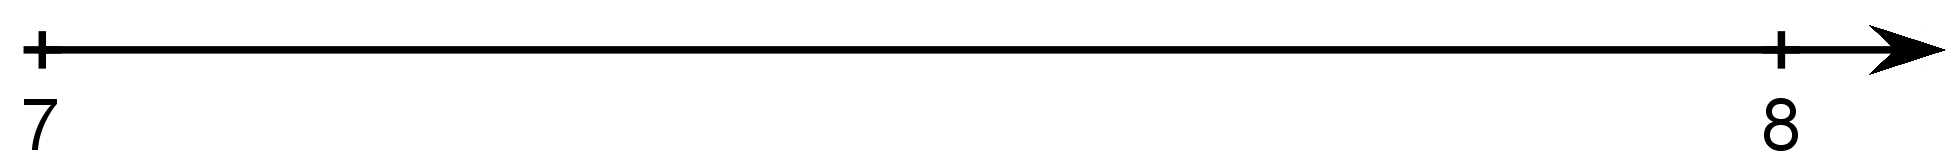 A number line with two tick marks indicated at each end. The number 7 is labeled on the tick mark on the far left and the number 8 is labeled on the tick mark on the far right.